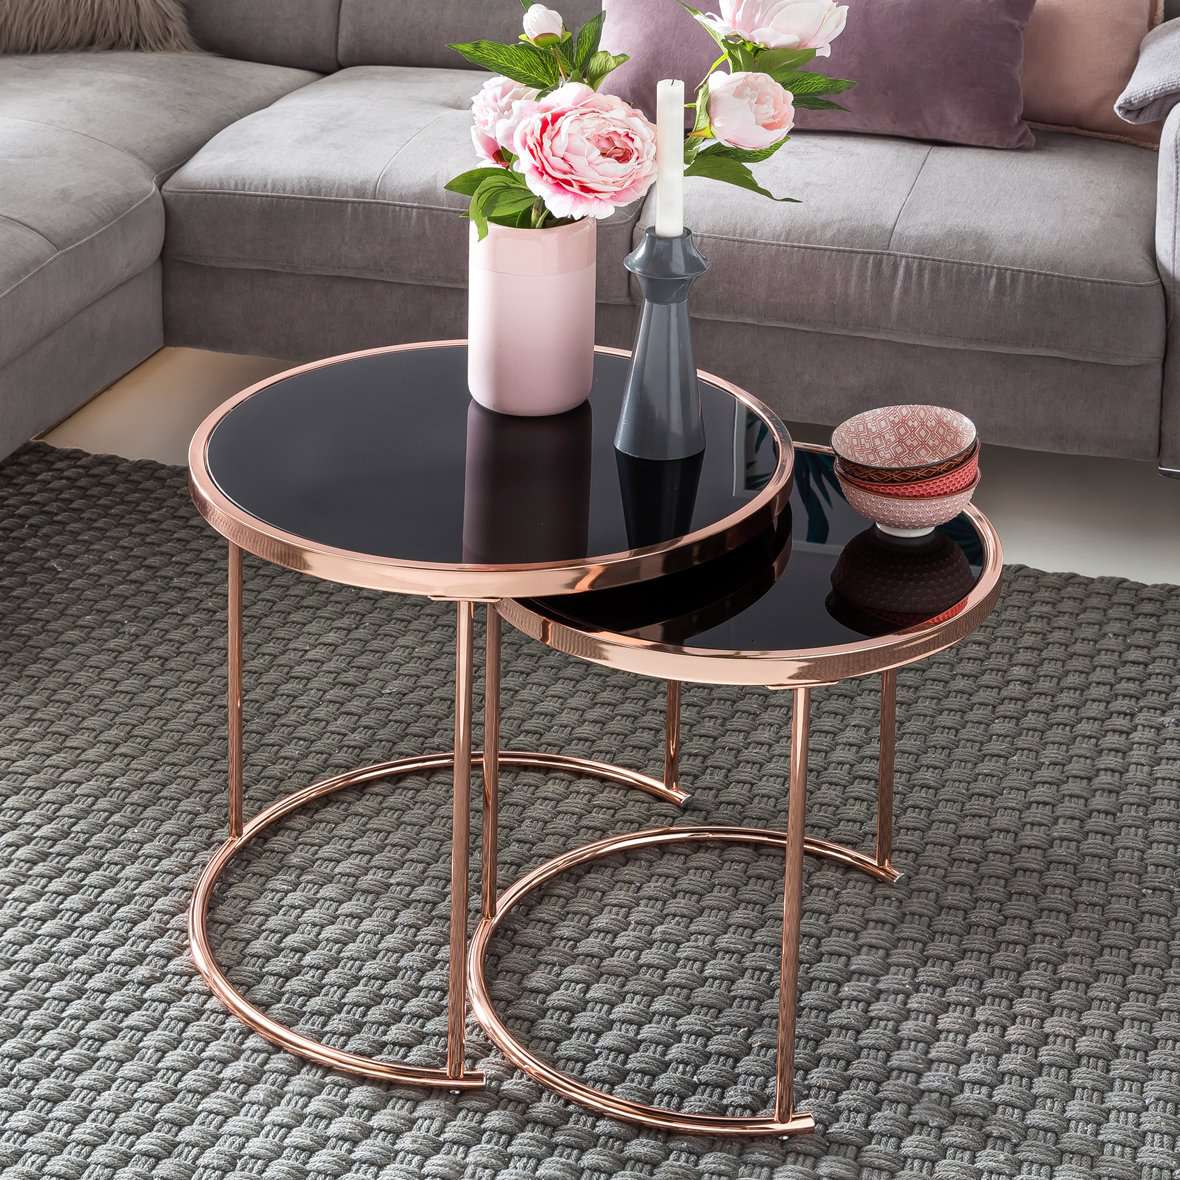 Nancy's River Modern Side Tables - Set of 2 - Side table - Table - Coffee table